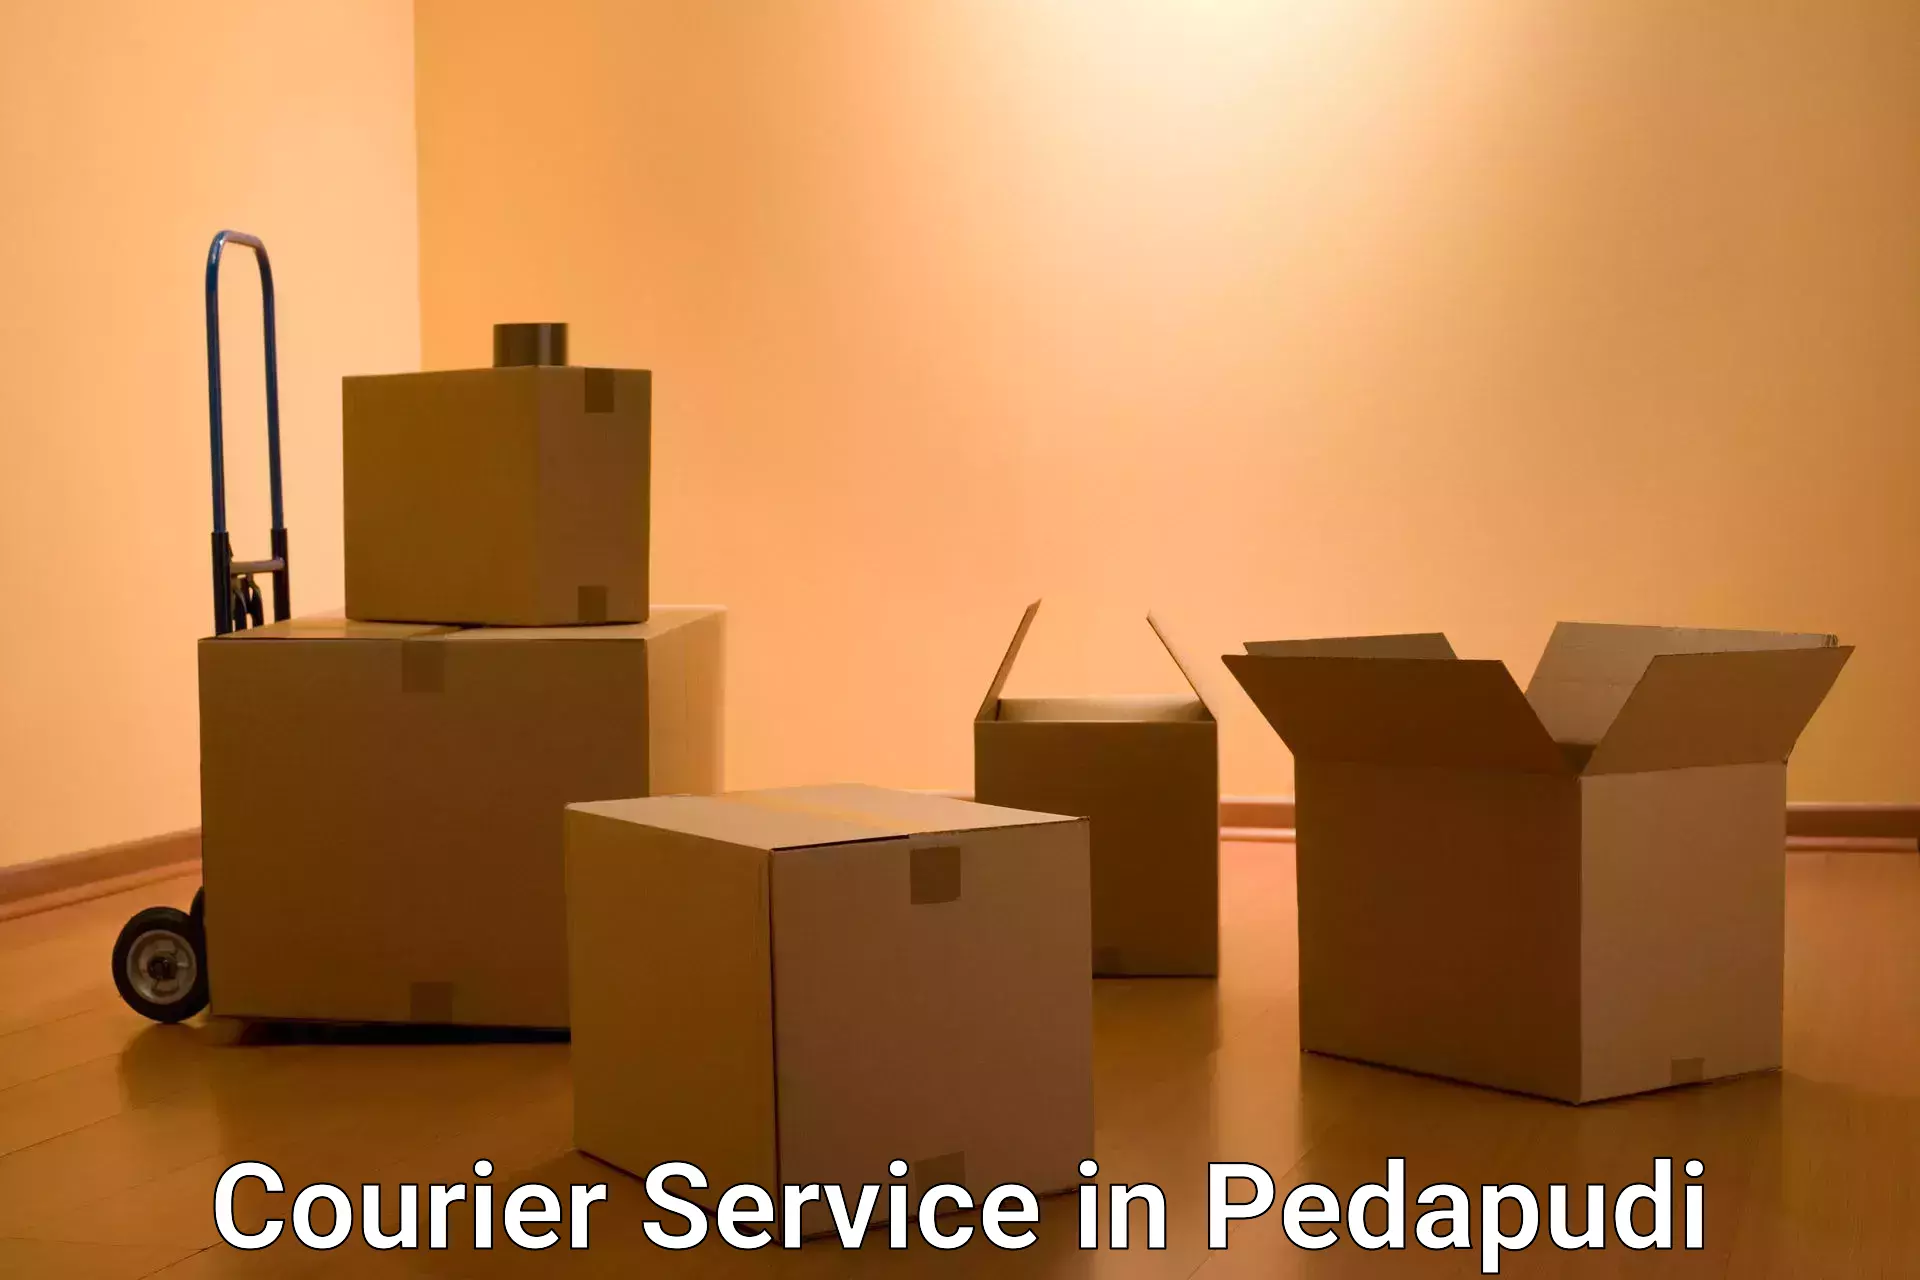 Express courier capabilities in Pedapudi